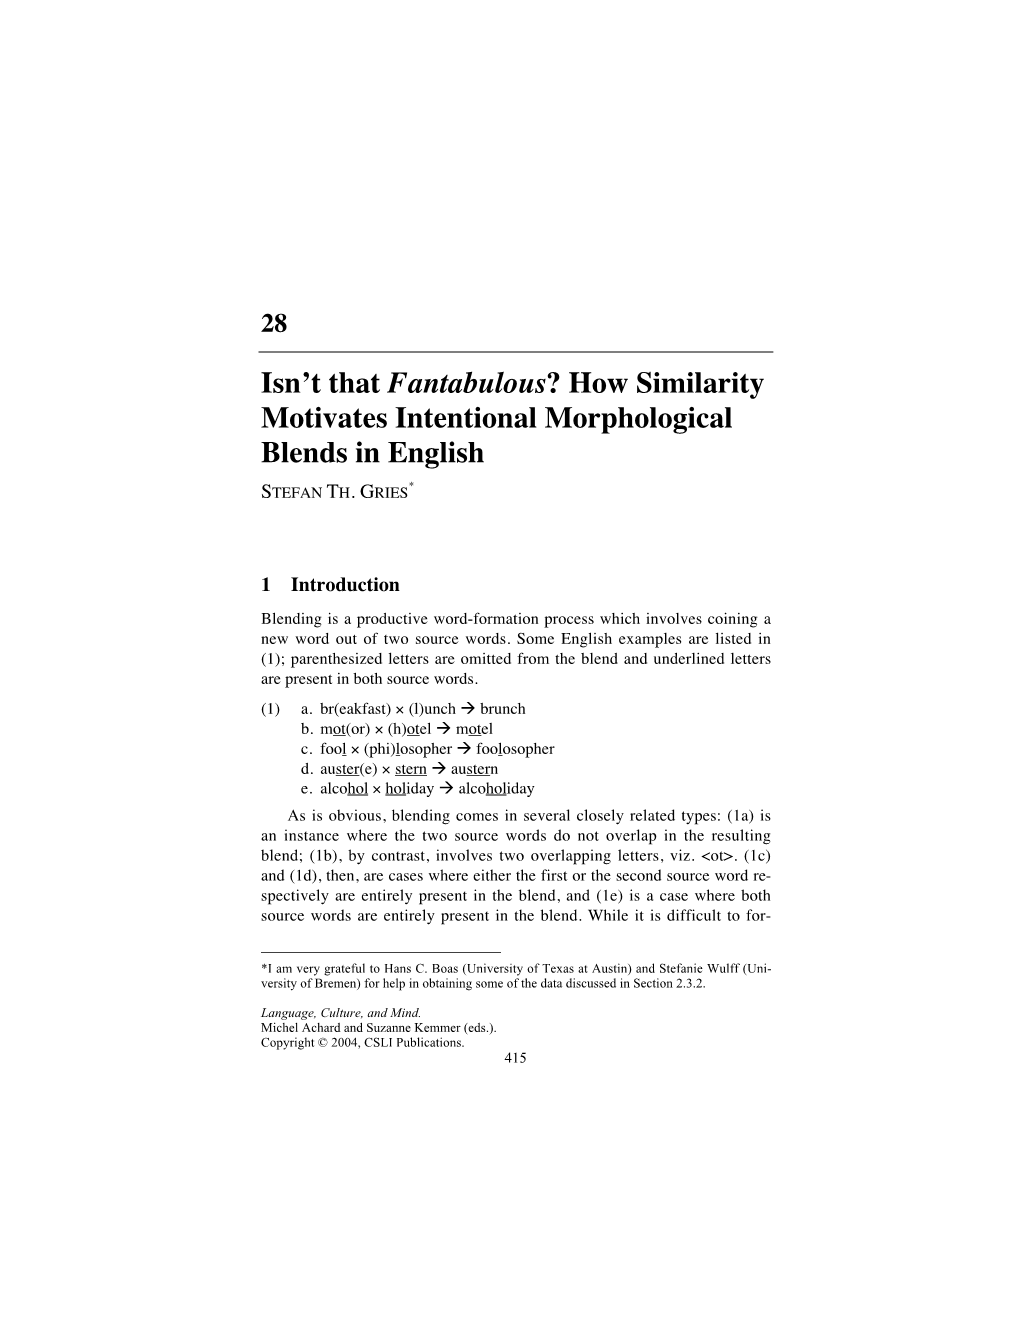 How Similarity Motivates Intentional Morphological Blends in English STEFAN TH